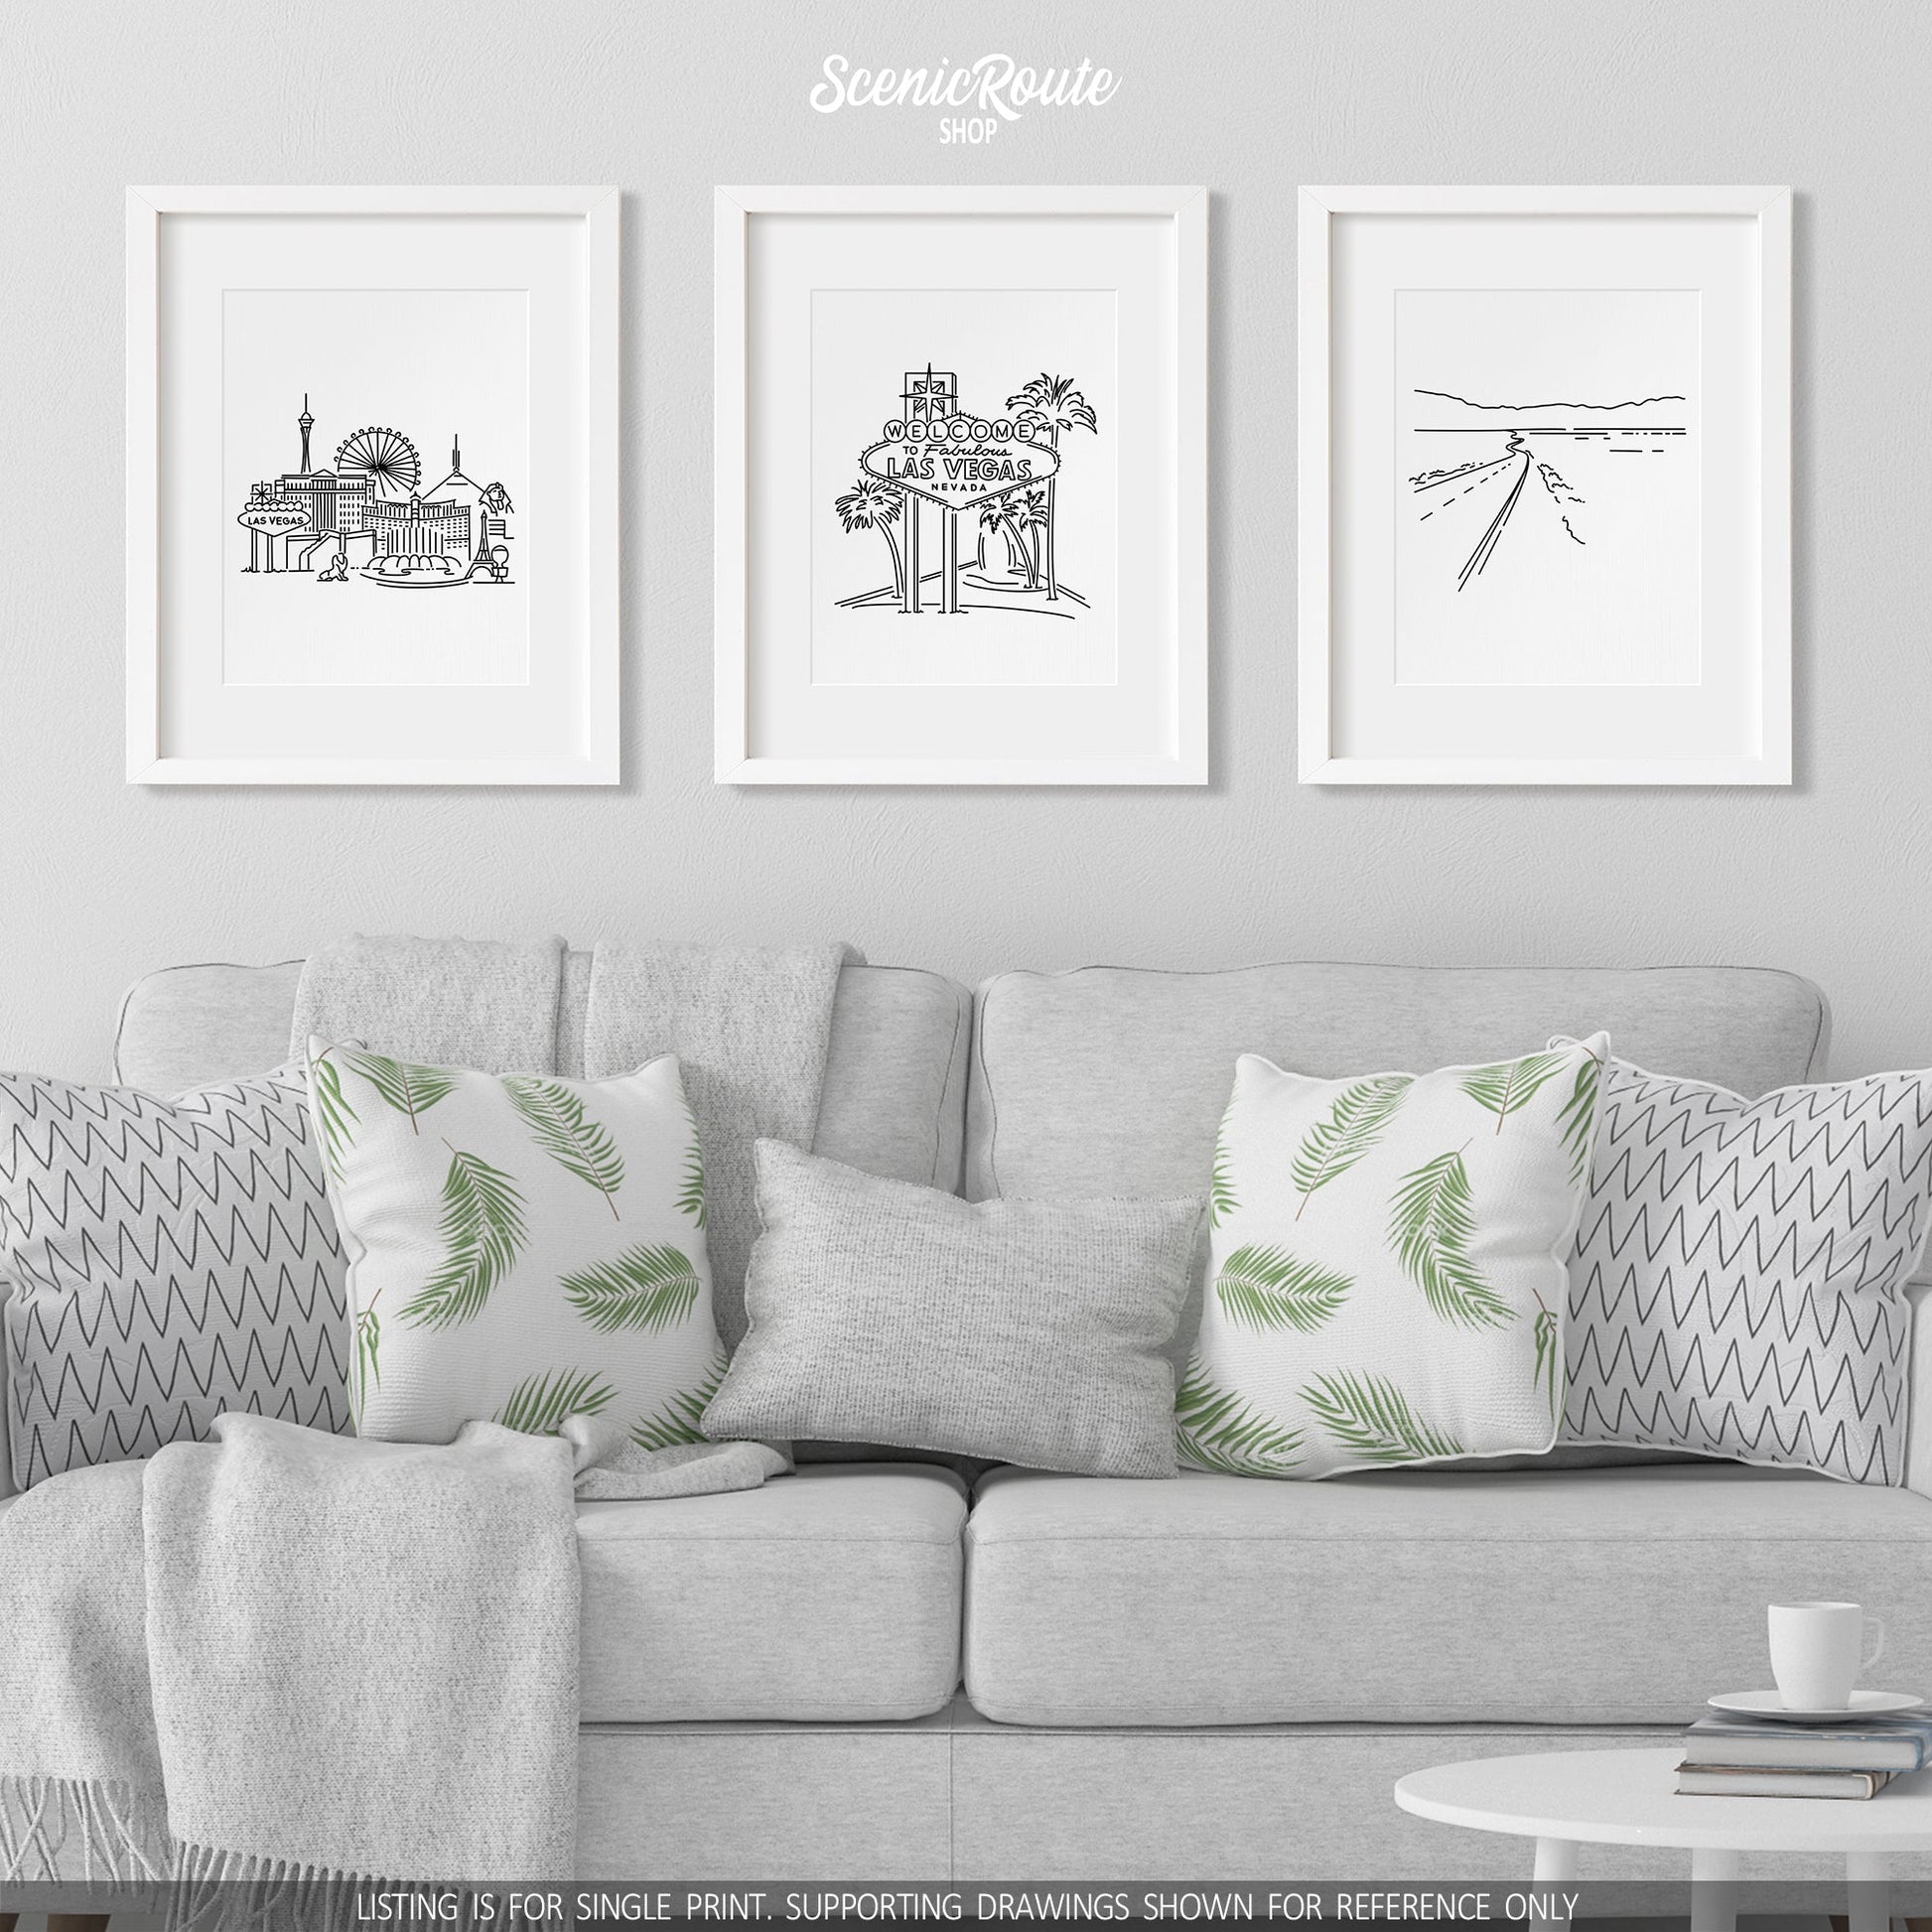 A group of three framed drawings on a white wall hanging above a couch with pillows and a blanket. The line art drawings include the Las Vegas Skyline, the Las Vegas Sign, and Death Valley National Park